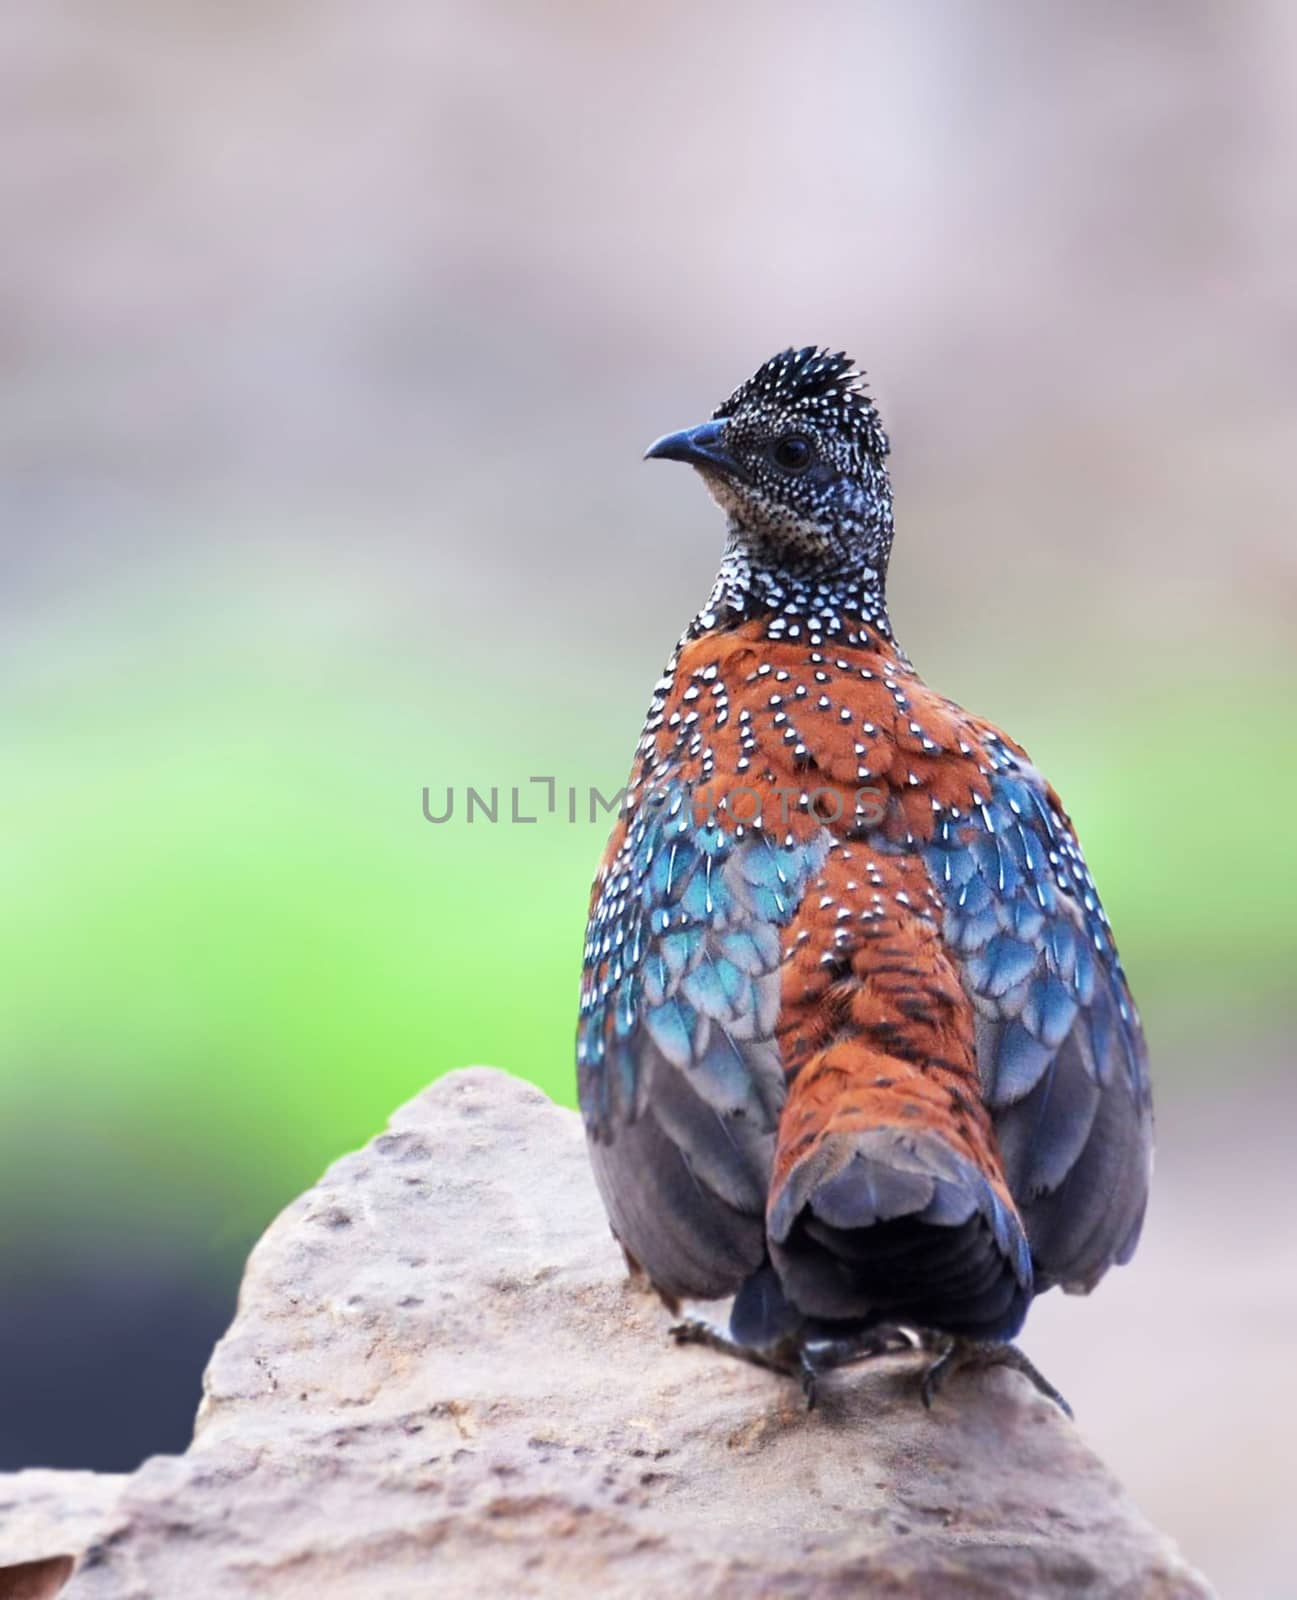 The painted spurfowl is a bird of the pheasant family found in rocky hill and scrub forests mainly in peninsular India. Males are more brightly coloured and spotted boldly in white.